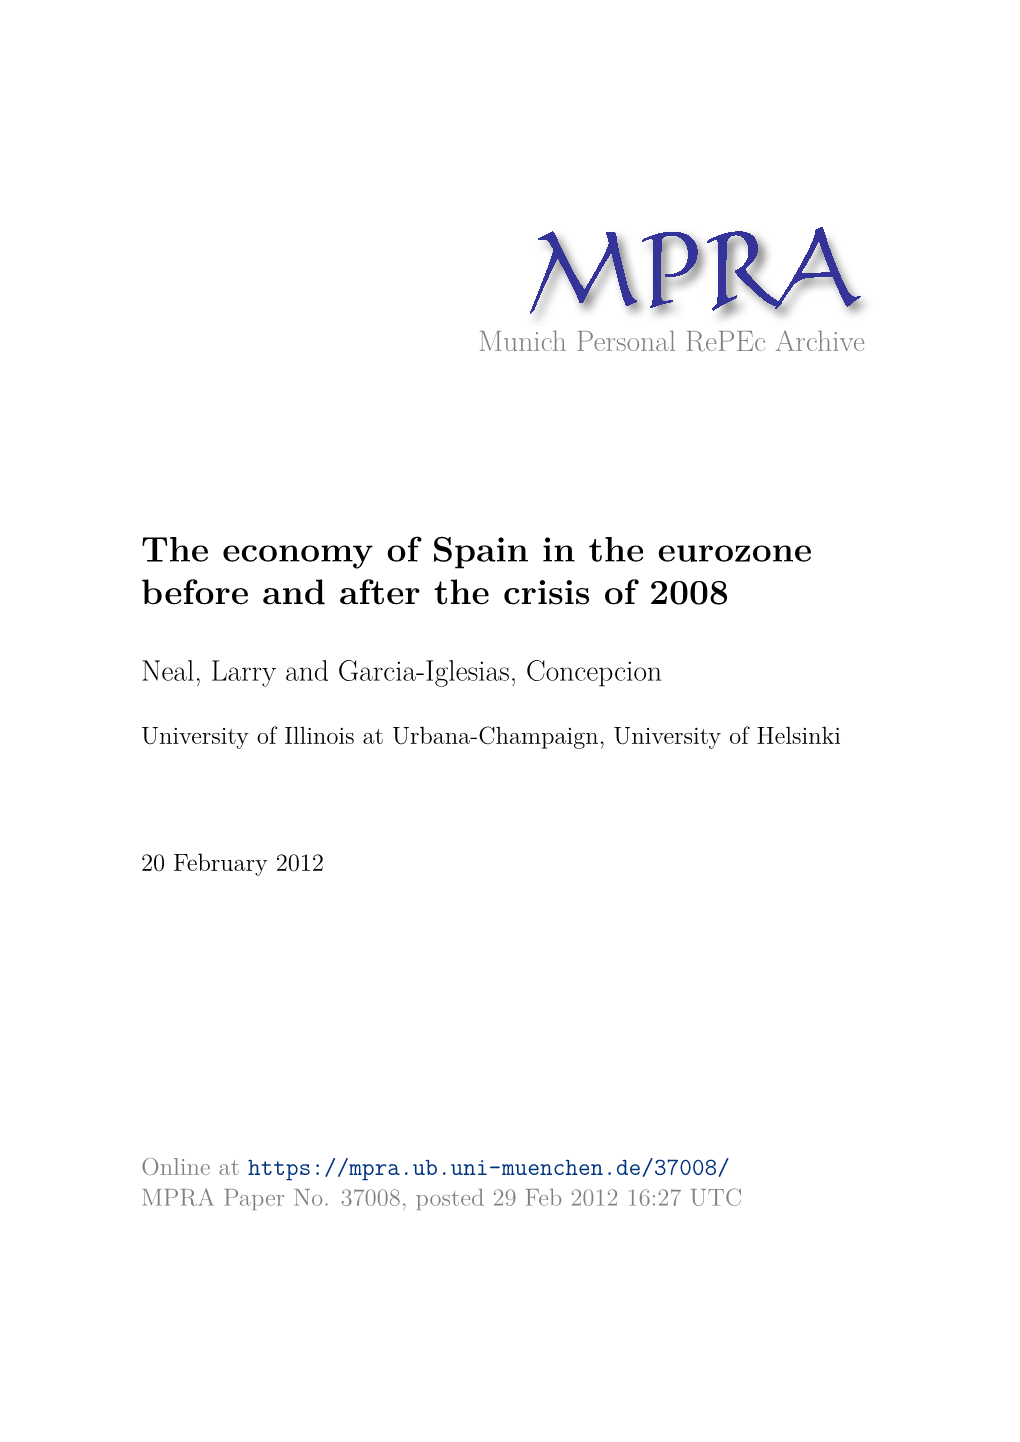 The Economy of Spain in the Eurozone Before and After the Crisis of 2008